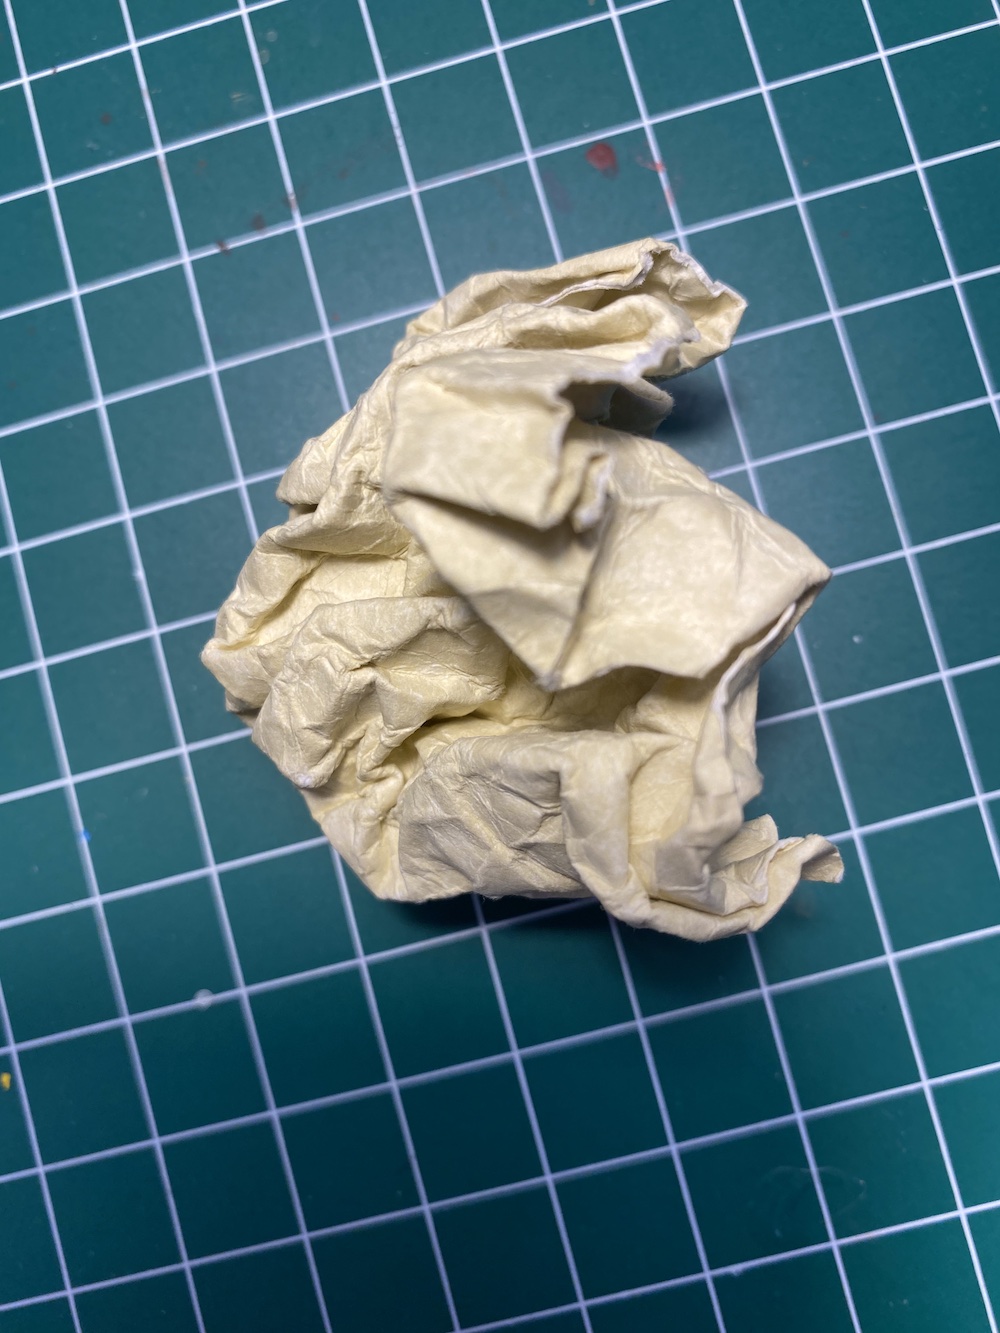 A crumpled ball of paper. Seriously.